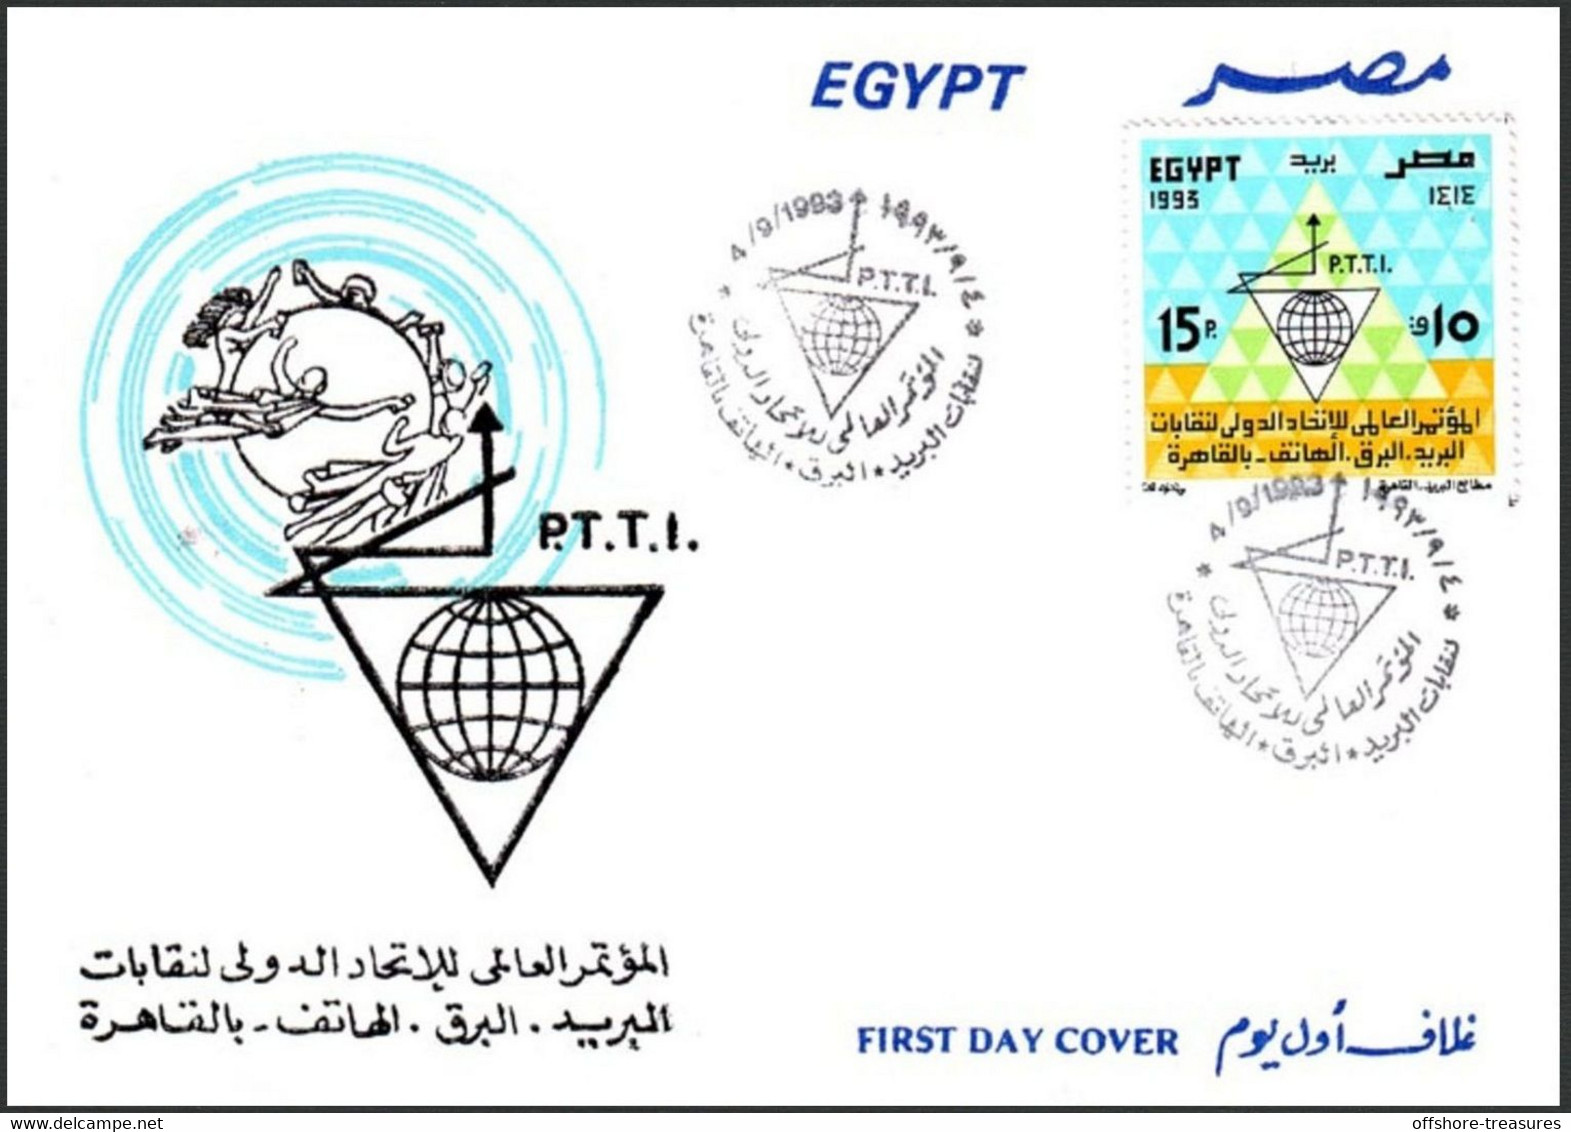 Egypt 1993 Illustrated FDC International Conference Telegraph - Telephone & Post Syndicates UPU - P.T.T.I. - Covers & Documents